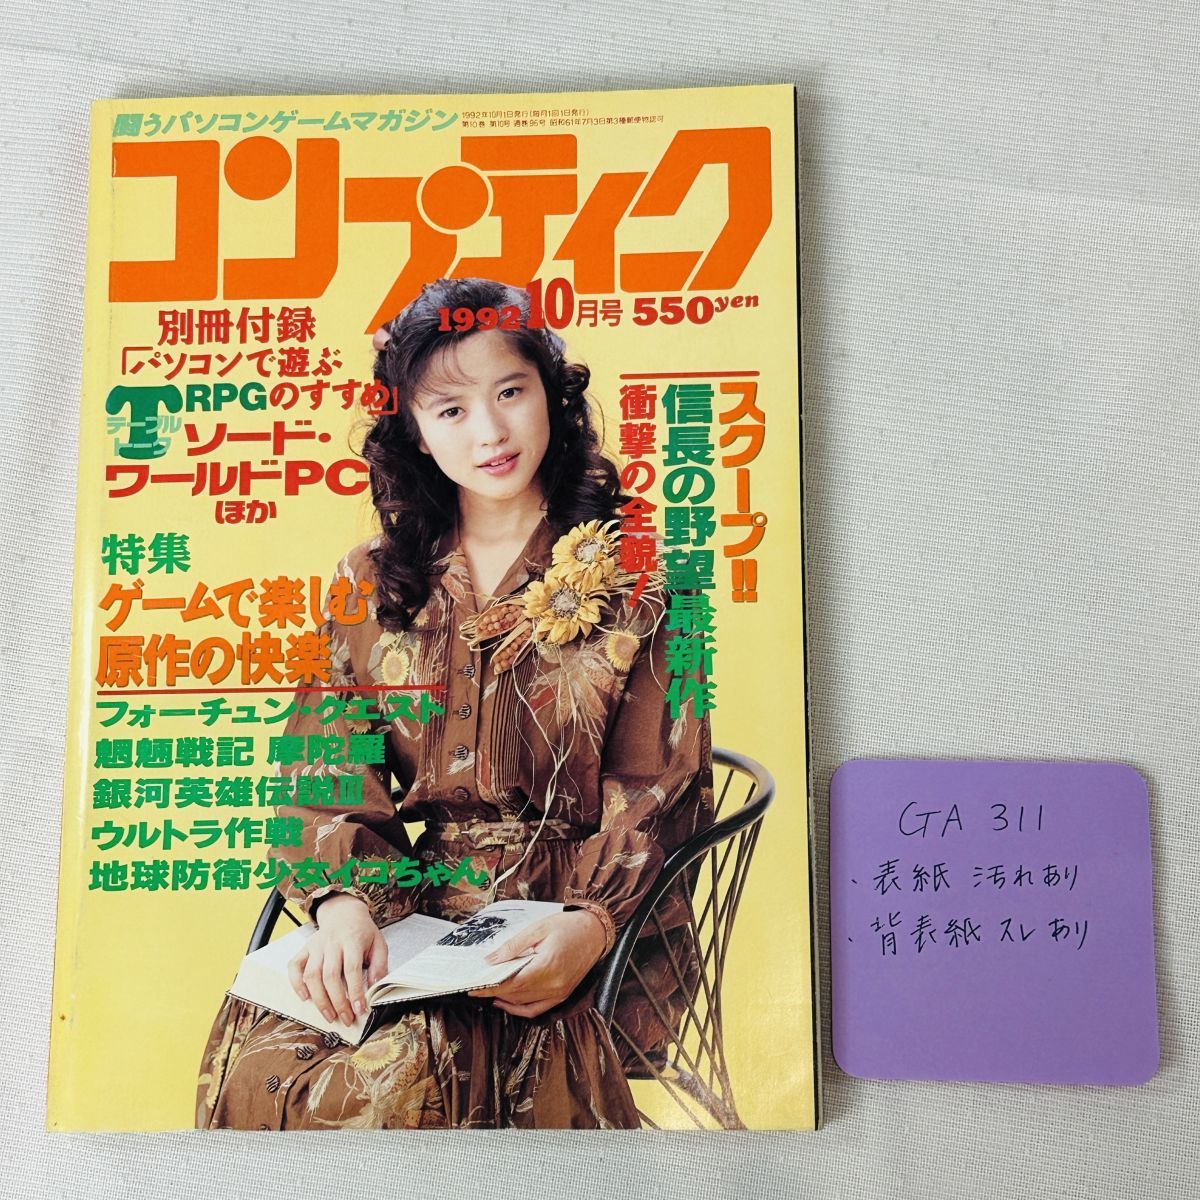 GA311 comp tea k1992 year 10 month number issue person / Sato . man issue place / Kadokawa Shoten 1992 year 10 month 1 day issue 